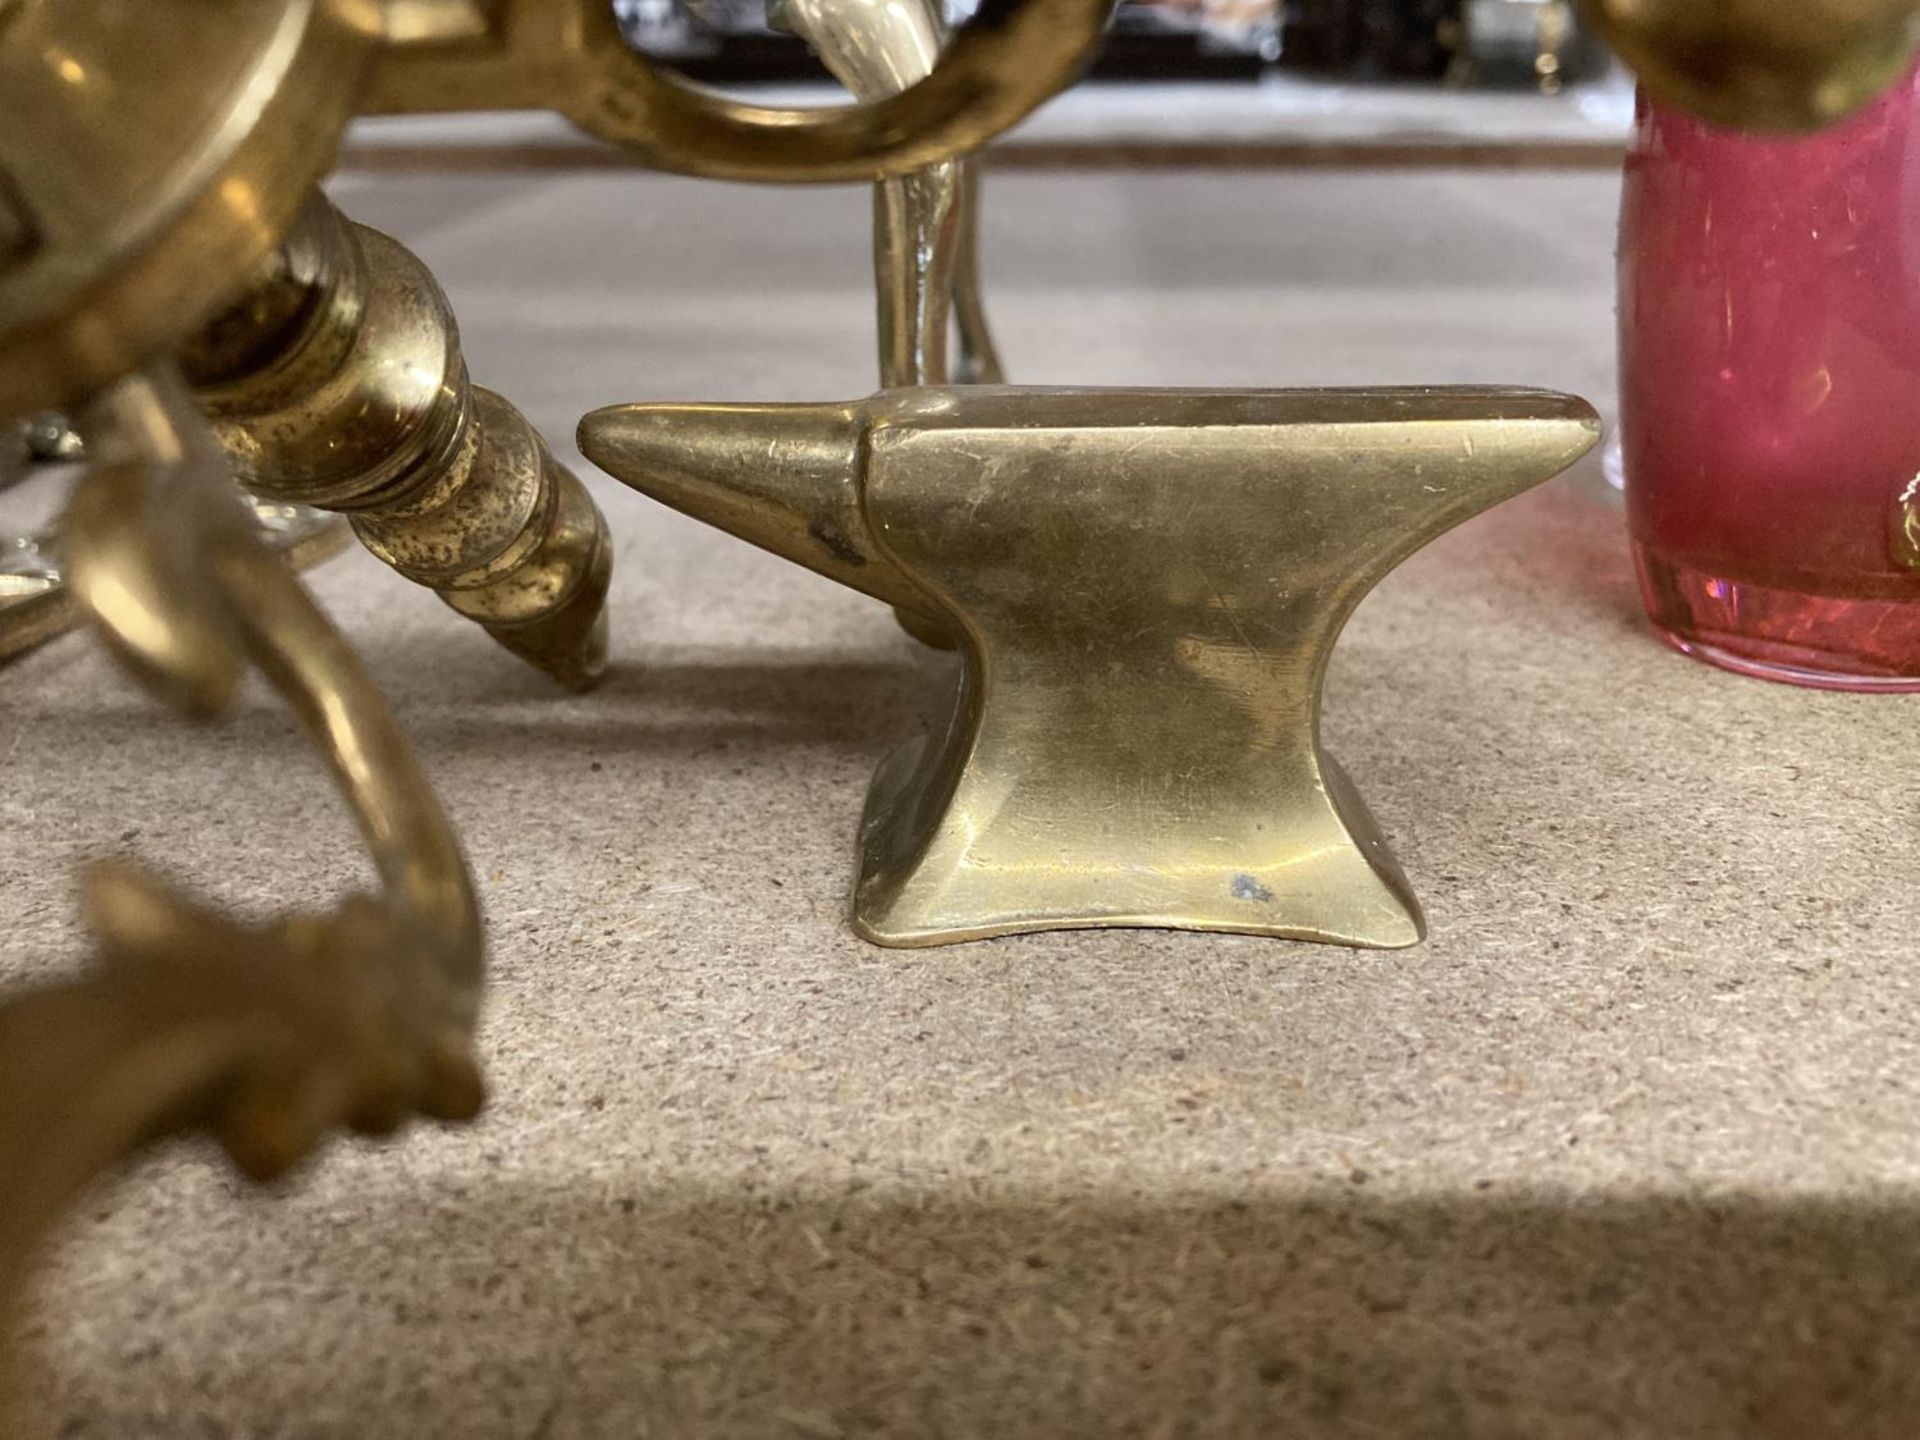 VARIOUS BRASS ITEMS TO INCLUDE A KETTLE WITH CERAMIC HANDLE ON A TRIVET, A SMALL ANVIL BOOT, ETC - Image 5 of 5